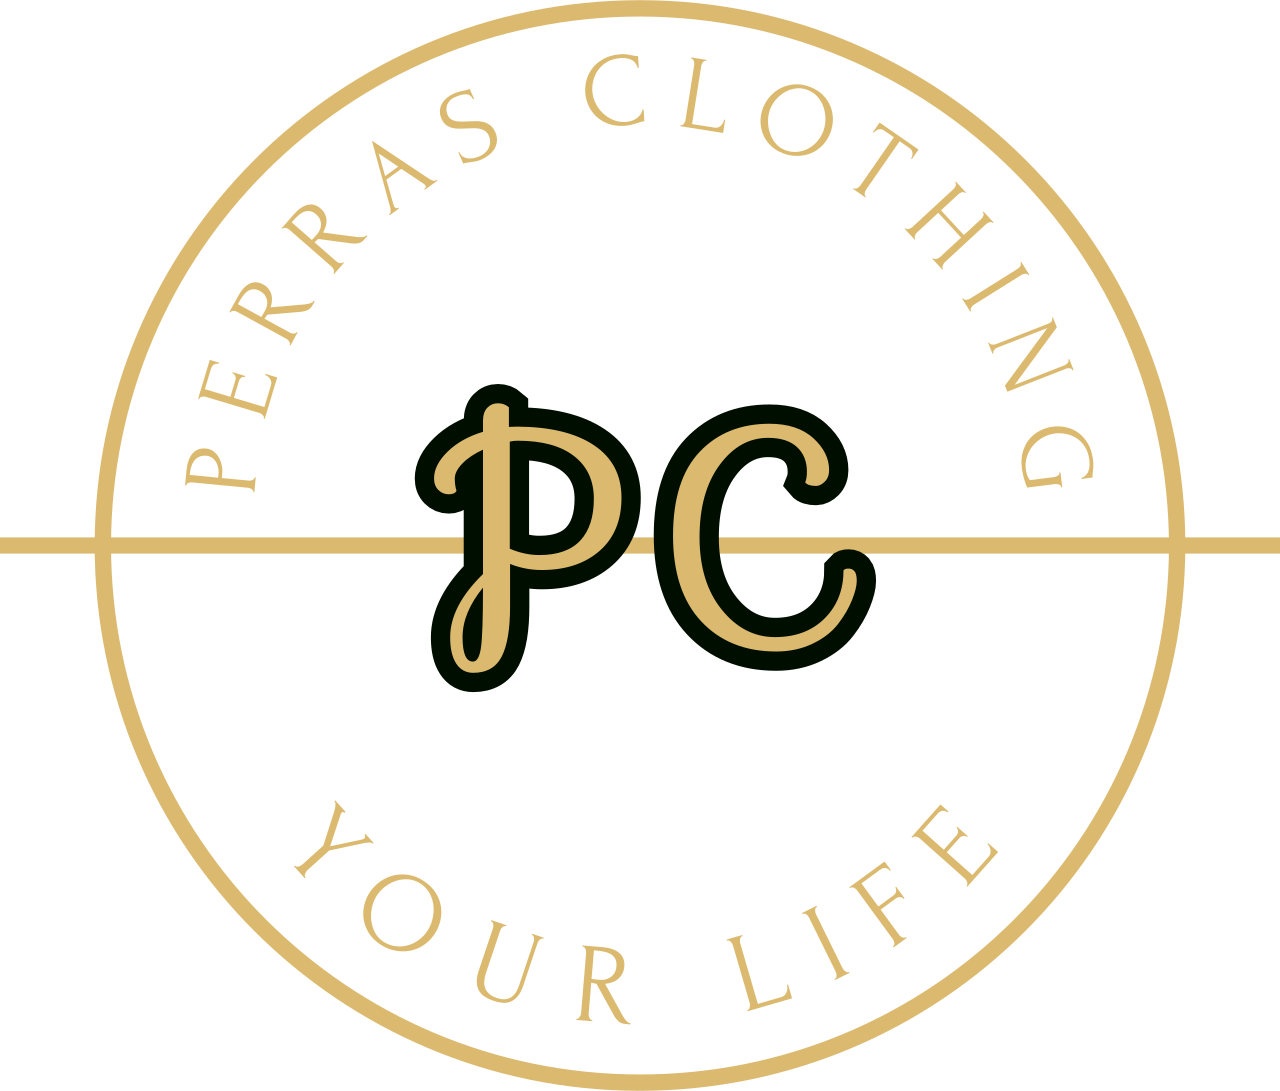 PERRAS CLOTHING's web page